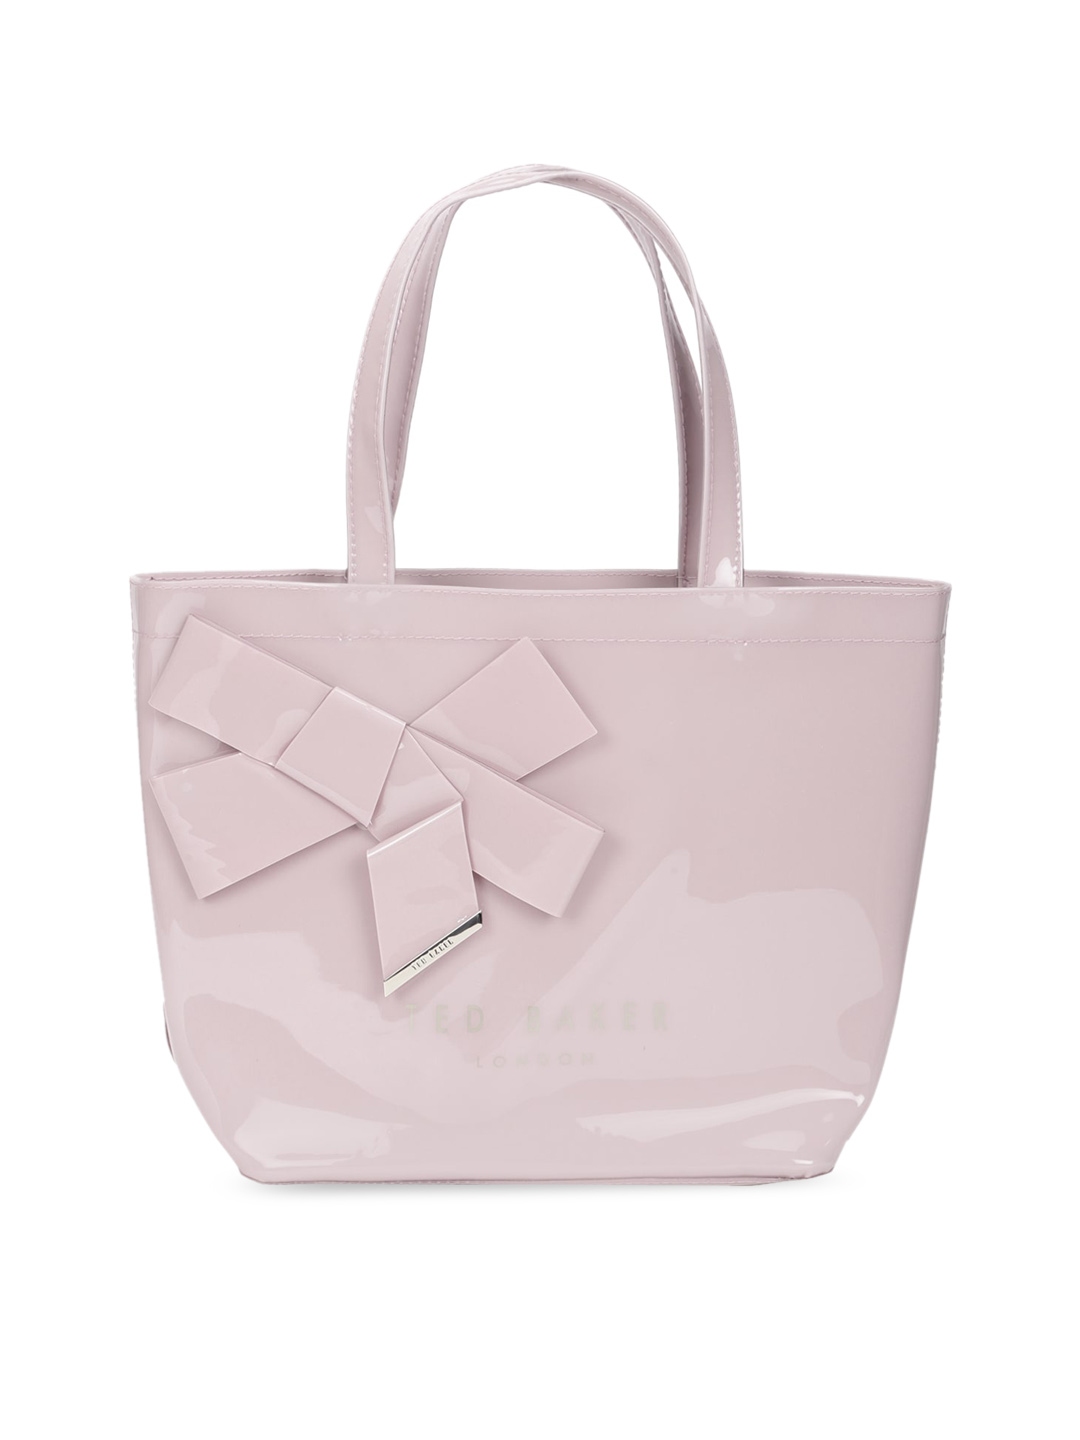 Ted Baker Pink Leather Shopper Tote Bag with Bow Detail